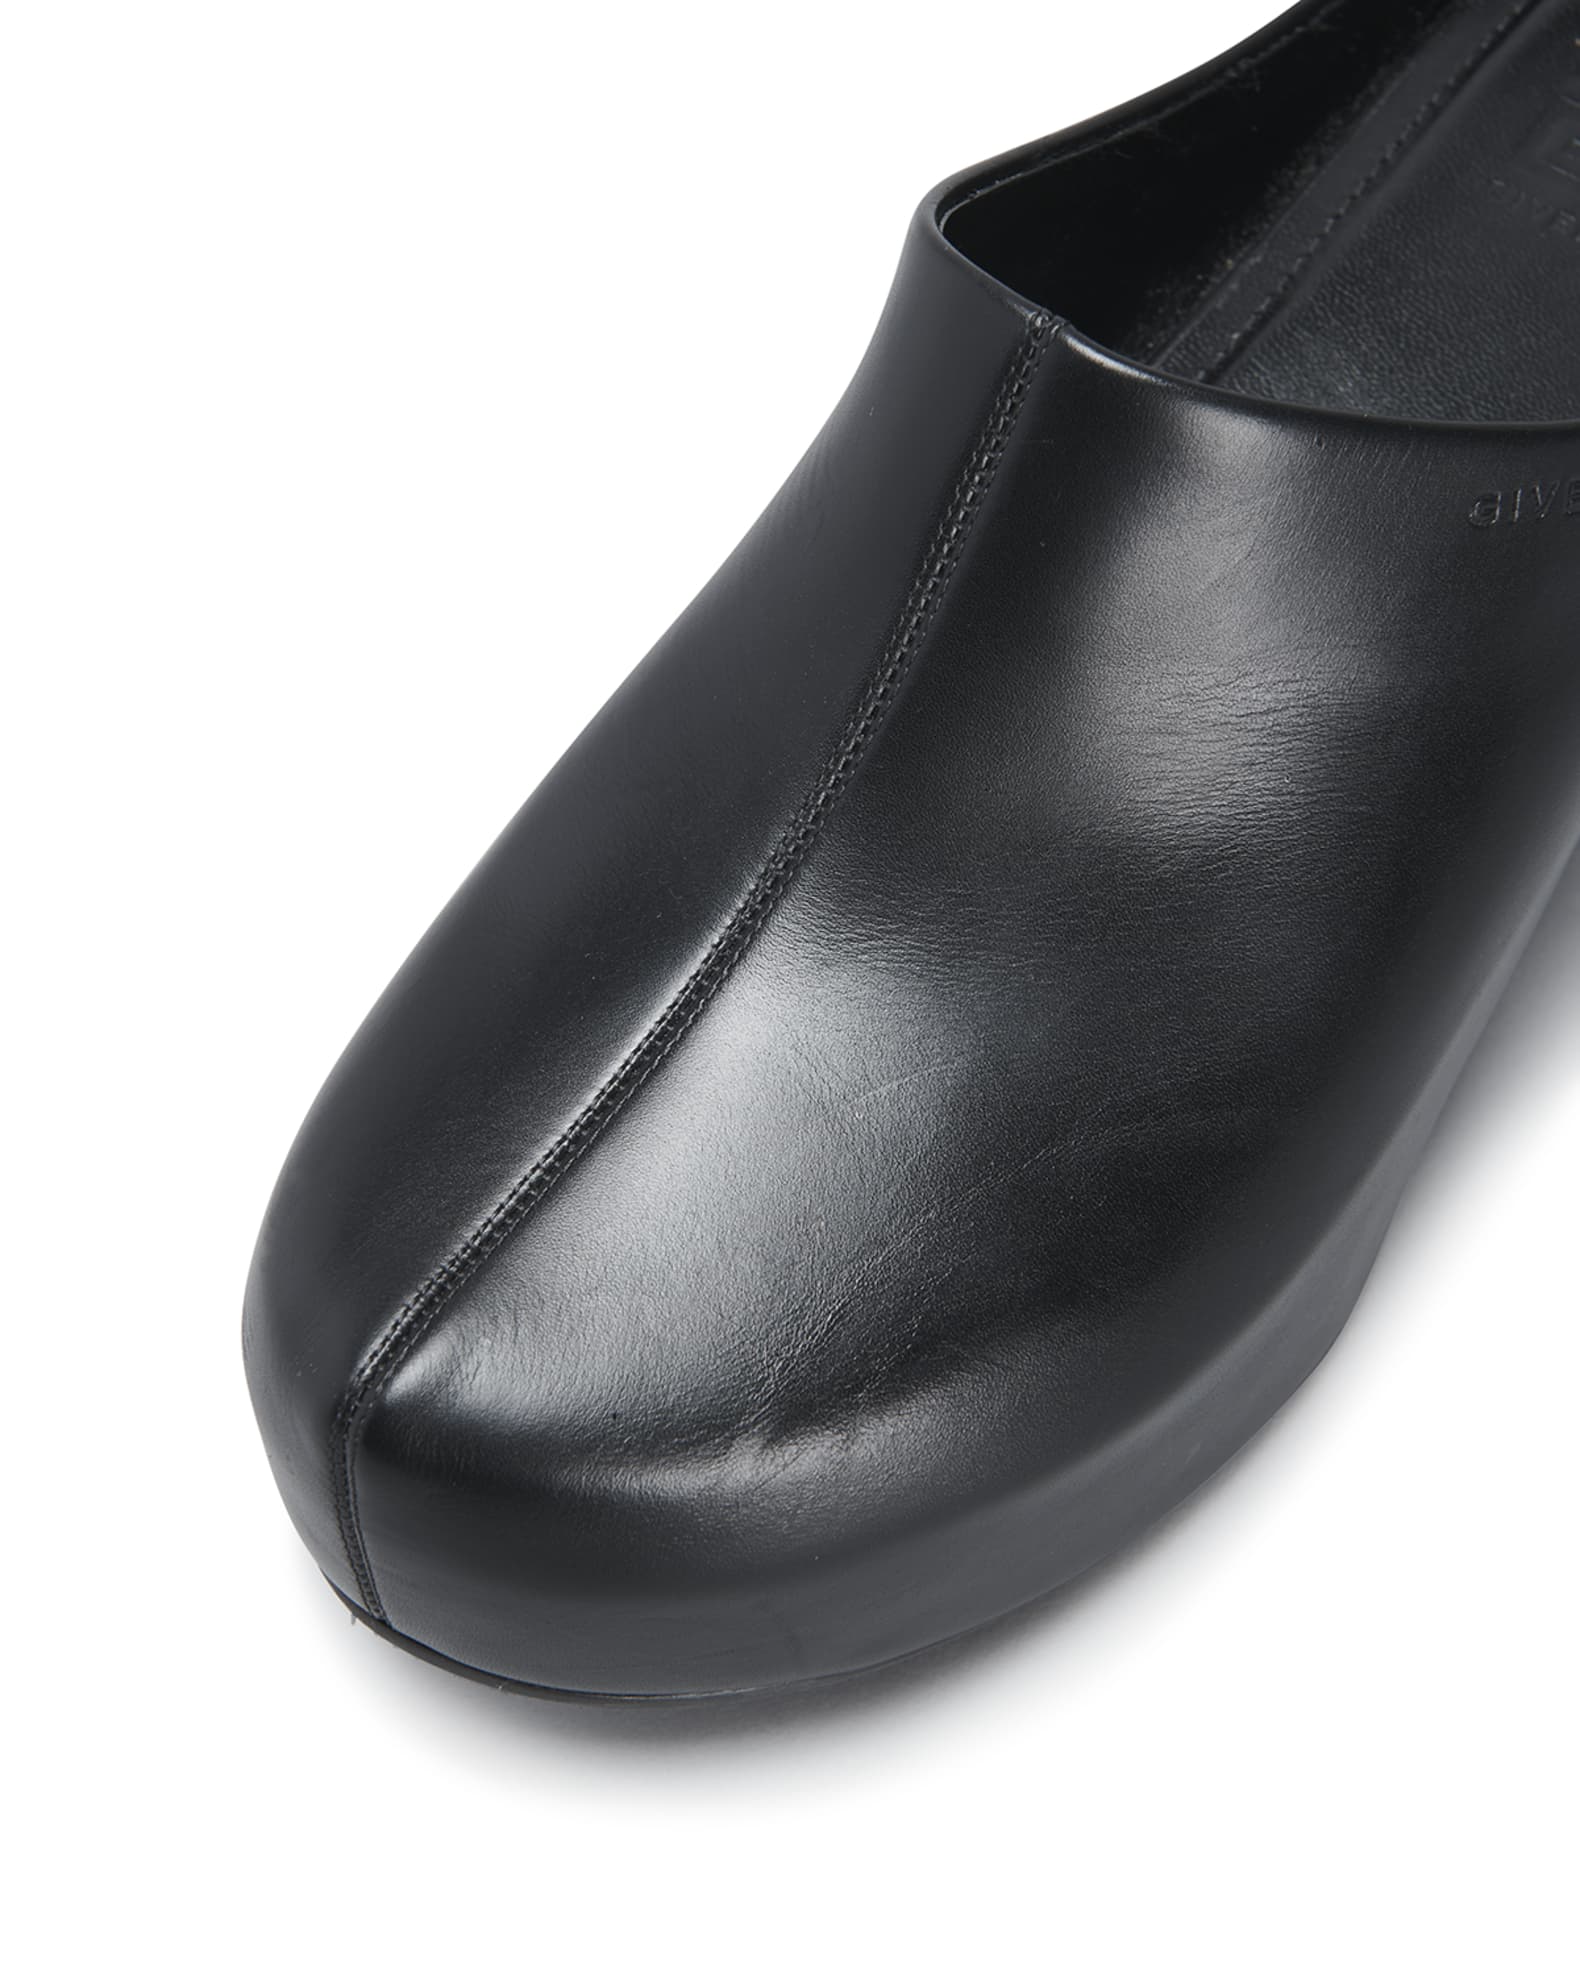 Givenchy G Lambskin Mule Clogs | Neiman Marcus